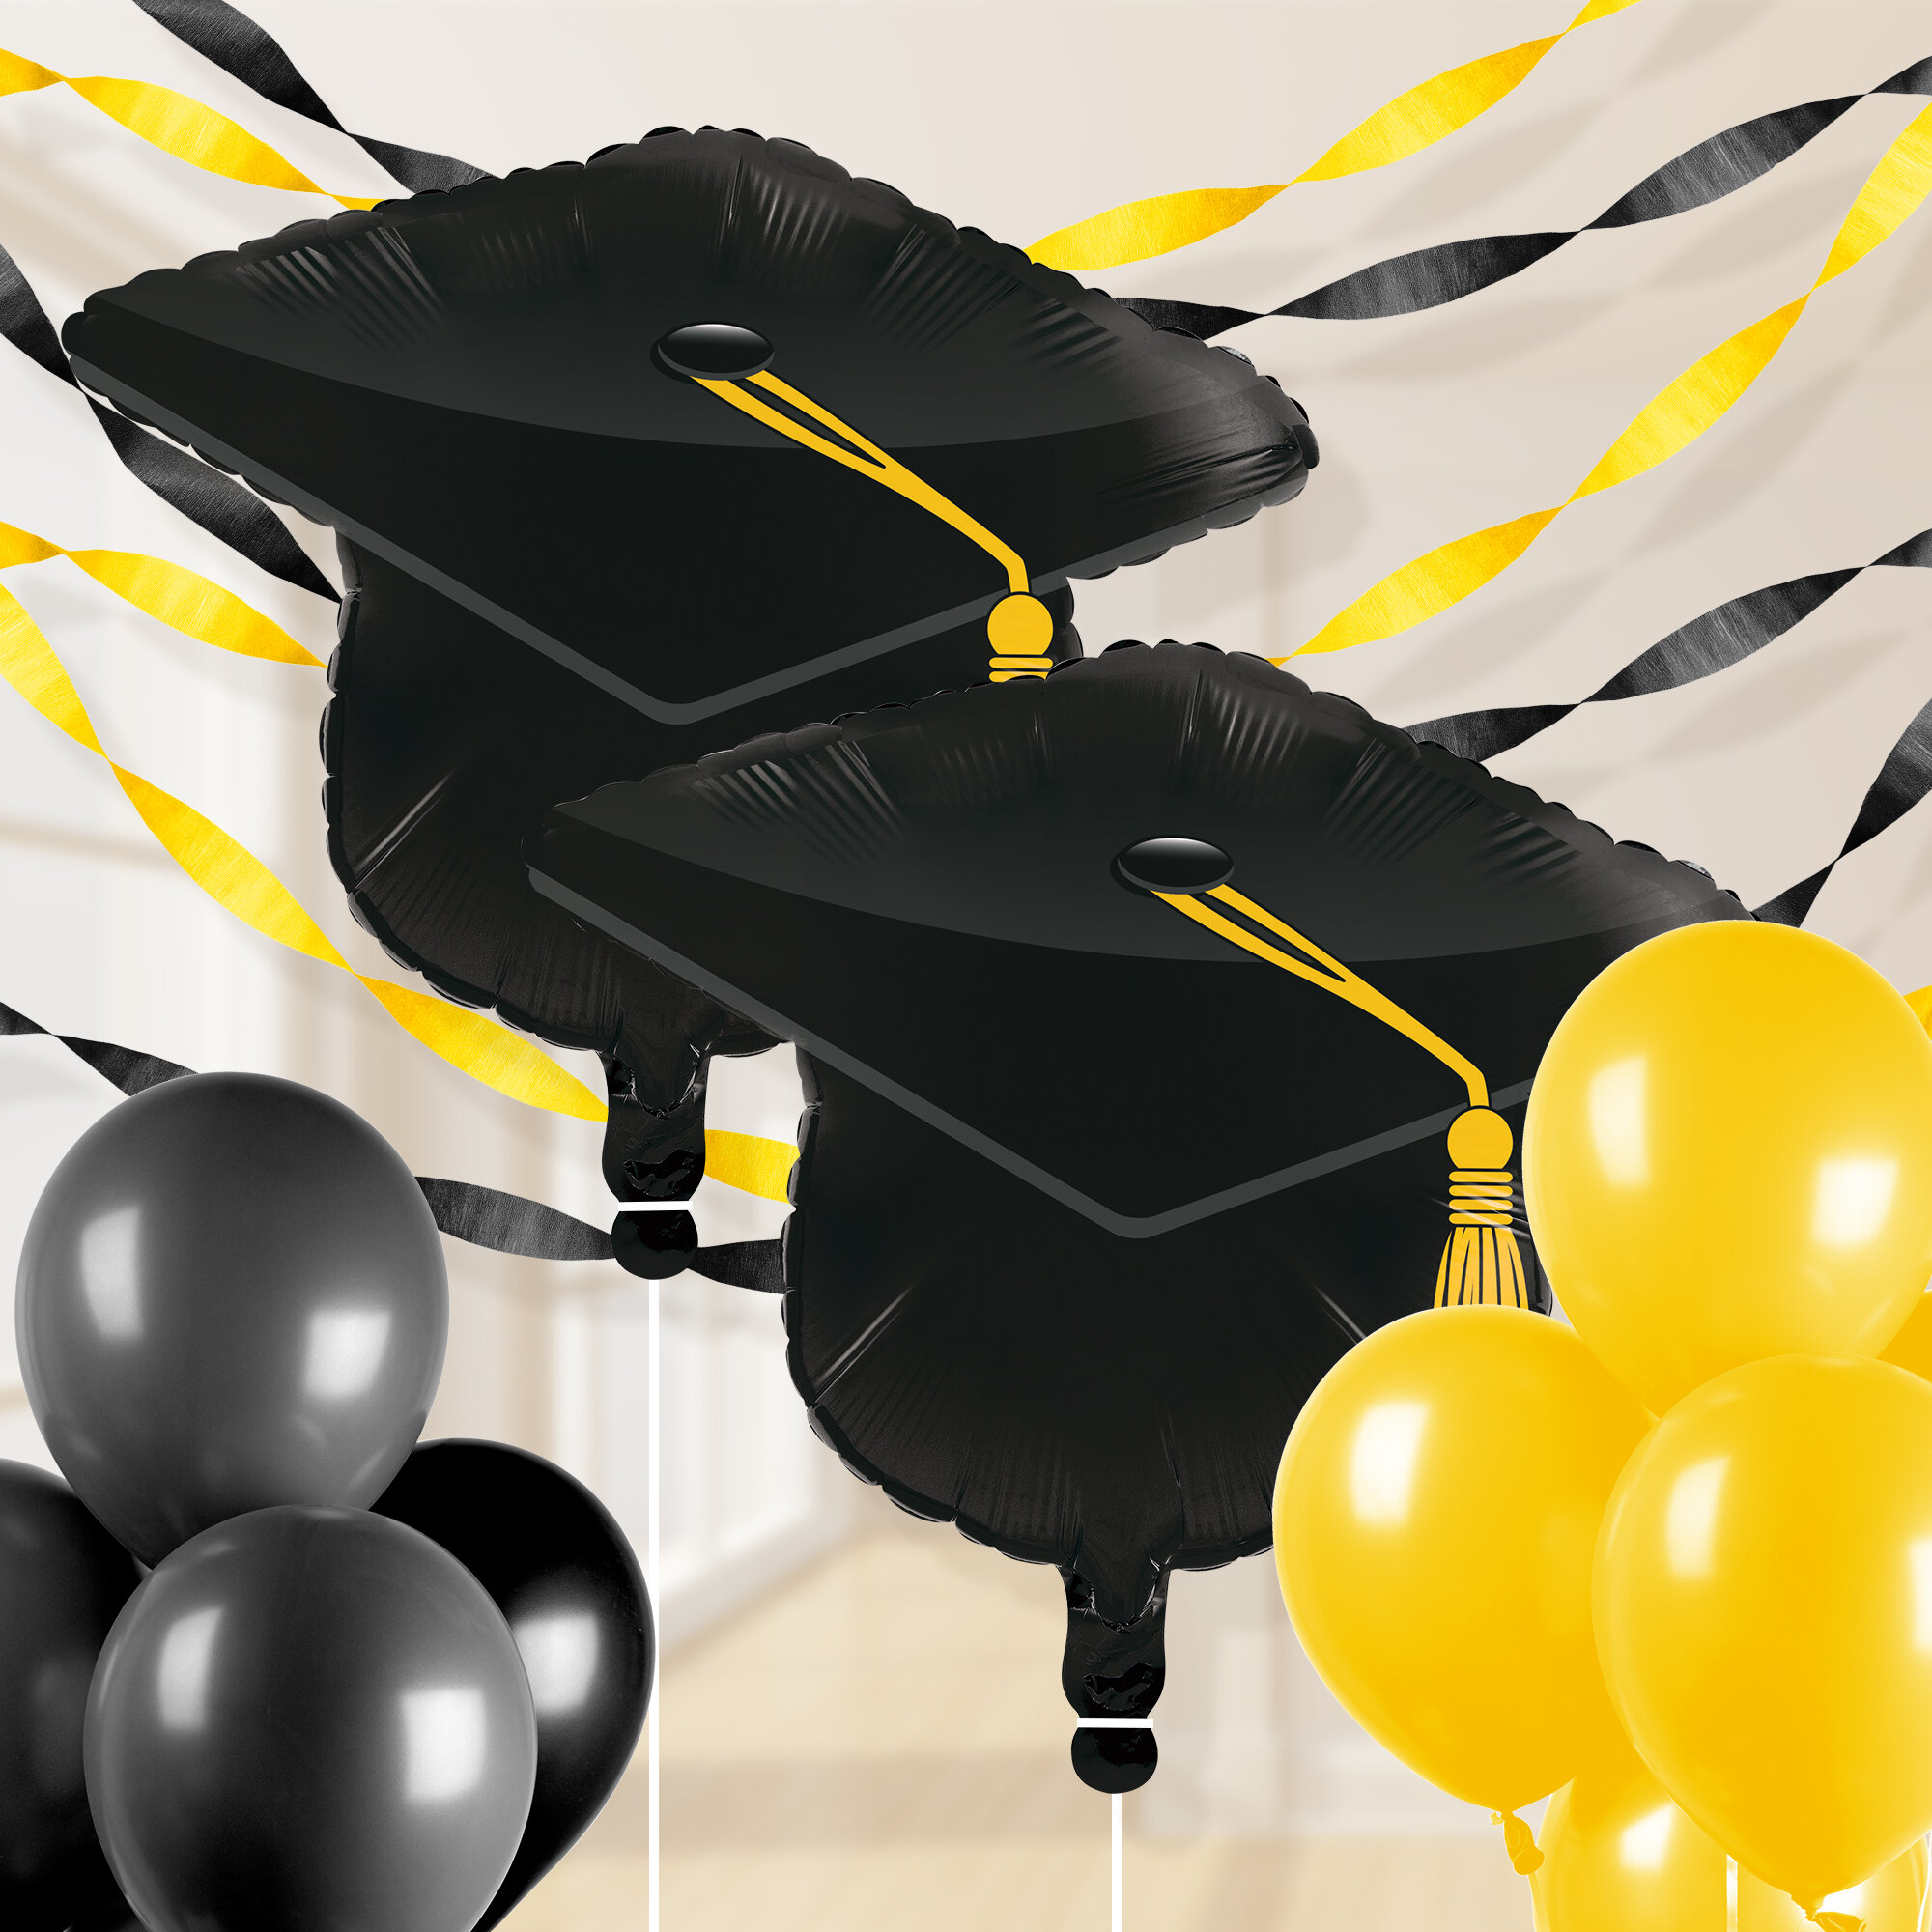 Amazon.com: SURCVIO Graduation Party Decorations Class of 2023, 45 Balloons,  4 String Light, Class of 2023 and proud of you signs for Balloon Box, Graduation  Party Supplies for Class of 2023（Black and